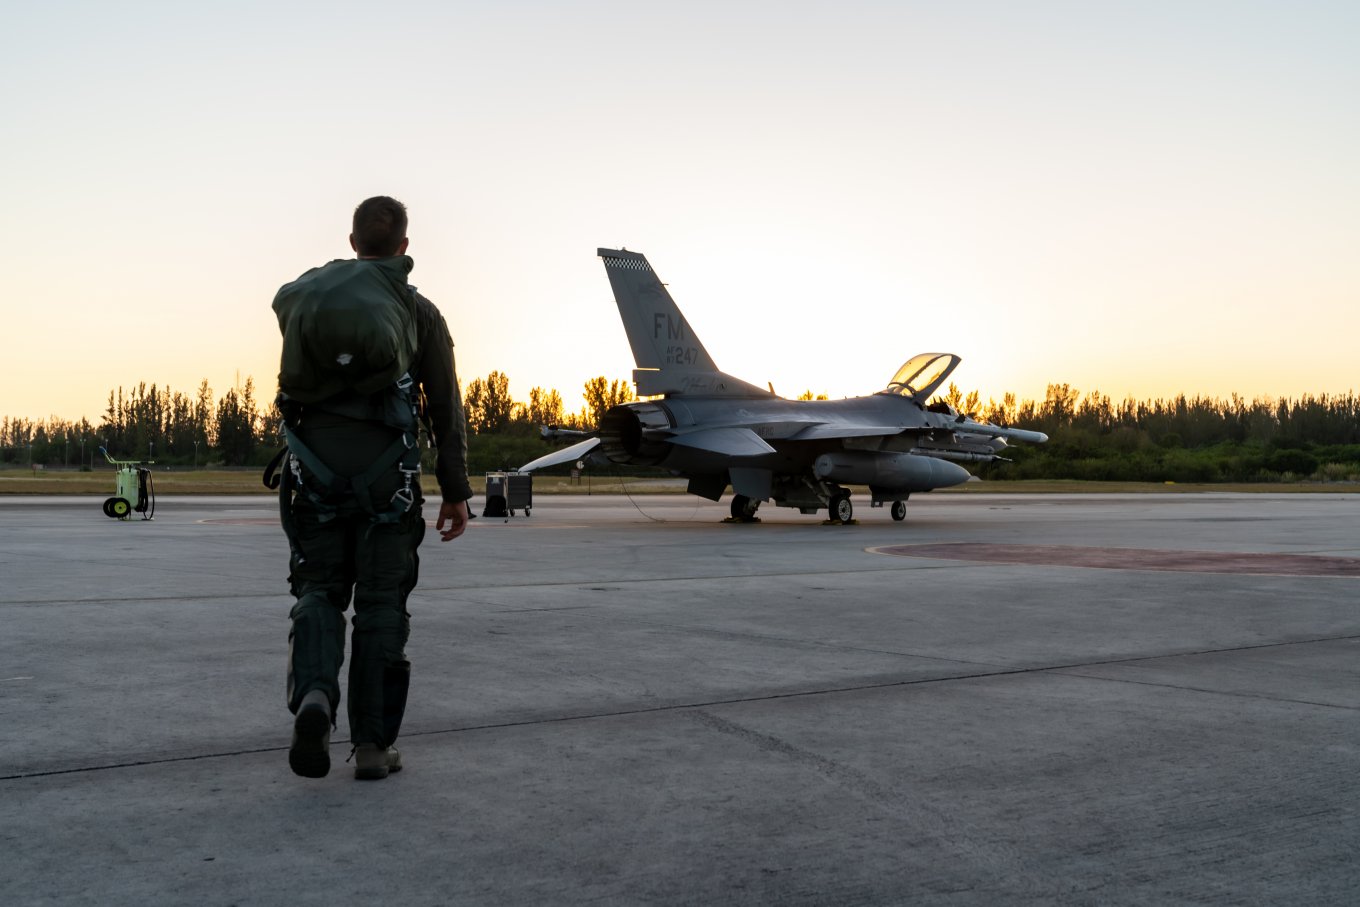 F-16 Fighting Falcon multirole fighter aircraft, Lockheed Martin Stands Ready to Help Ukrainian Pilots Fly and Maintain its F-16 Fighter Jets, Defense Express